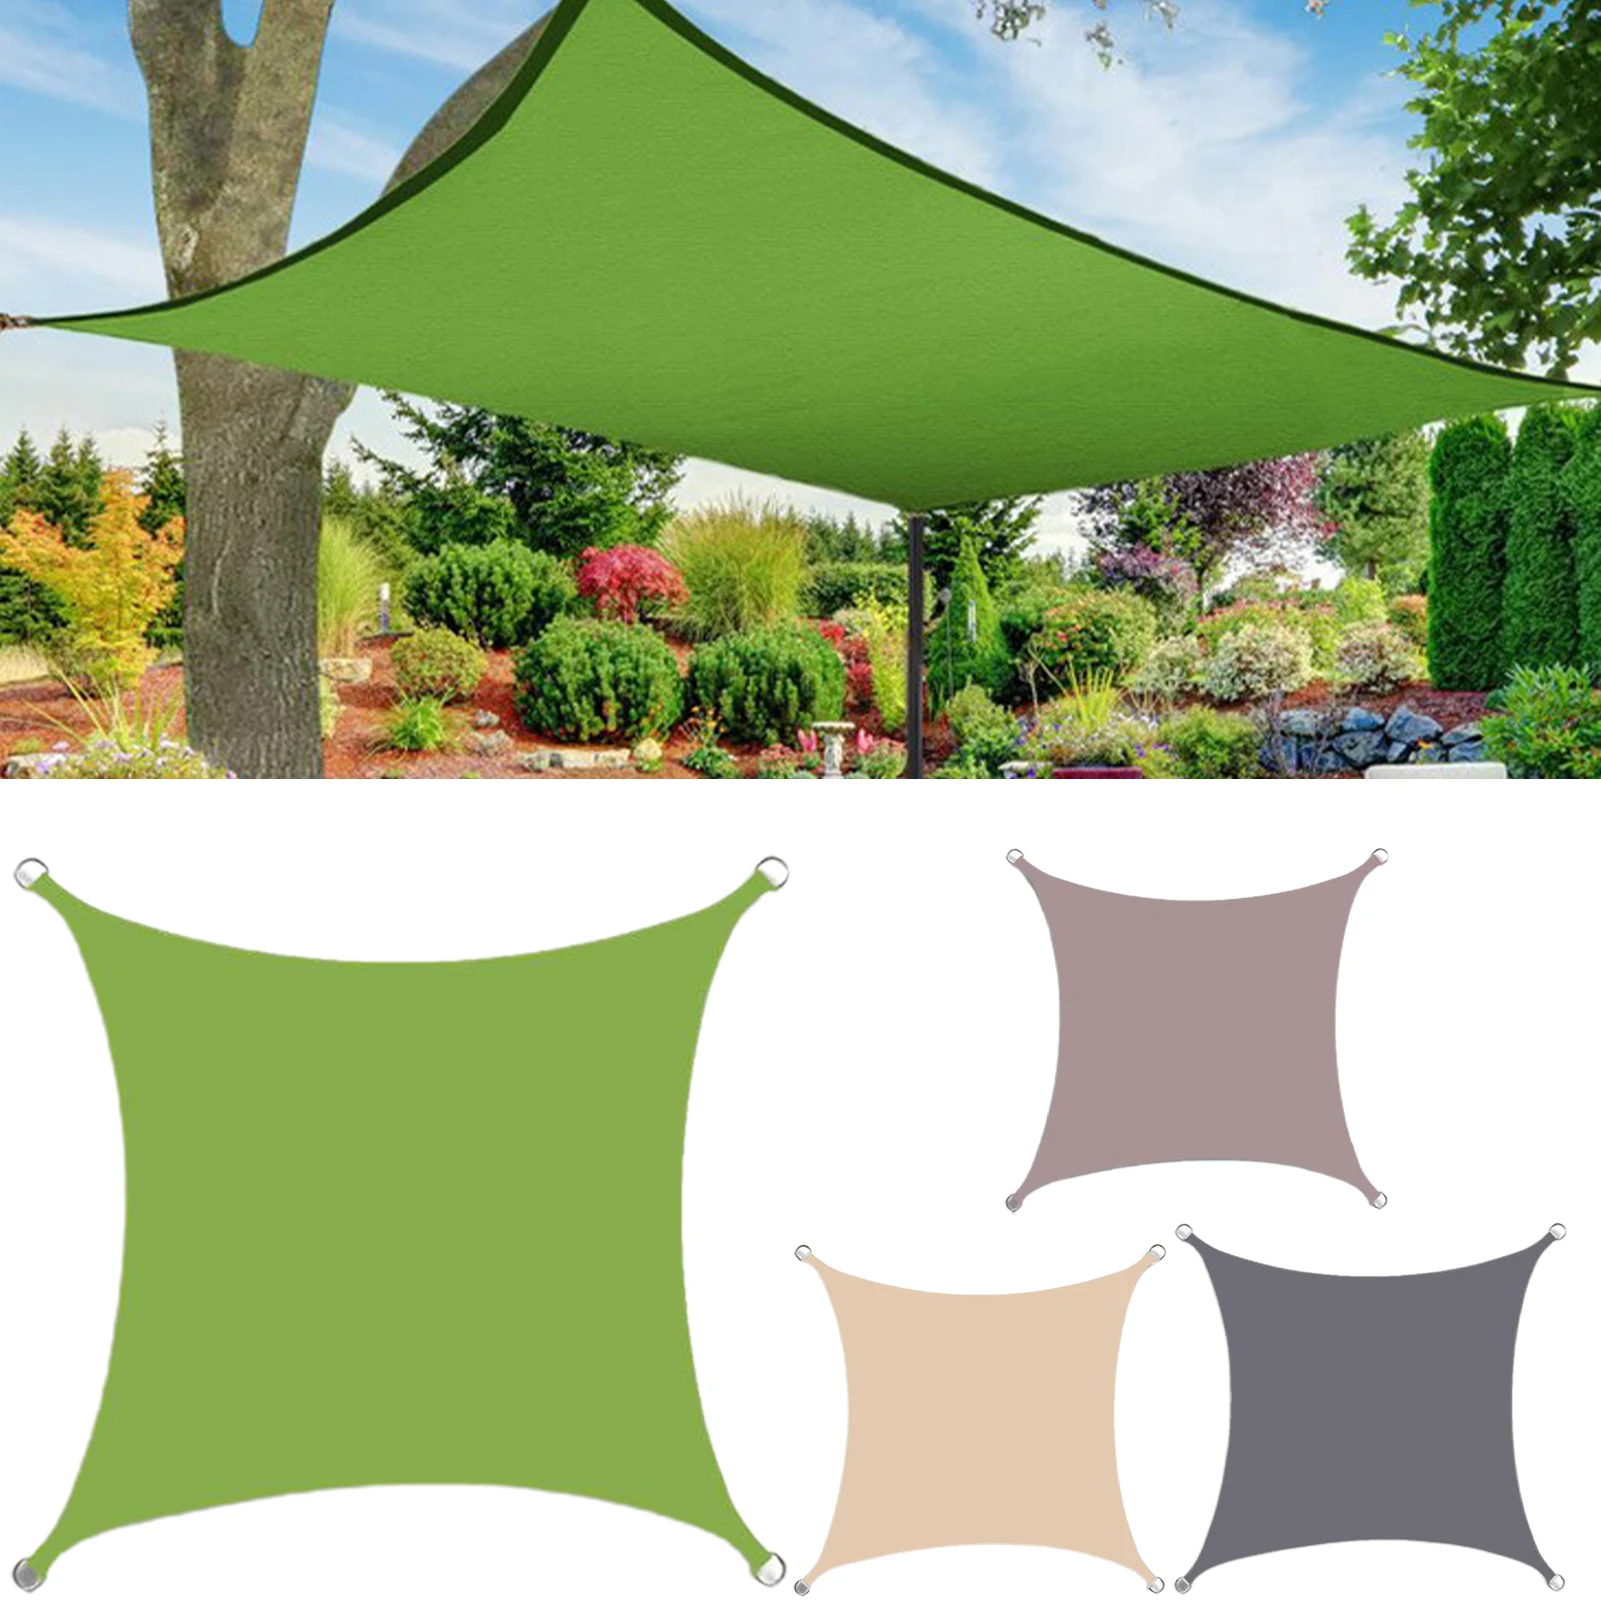 UV Protection Garden Canopy Easy To Assemble And Install For Parks Carports